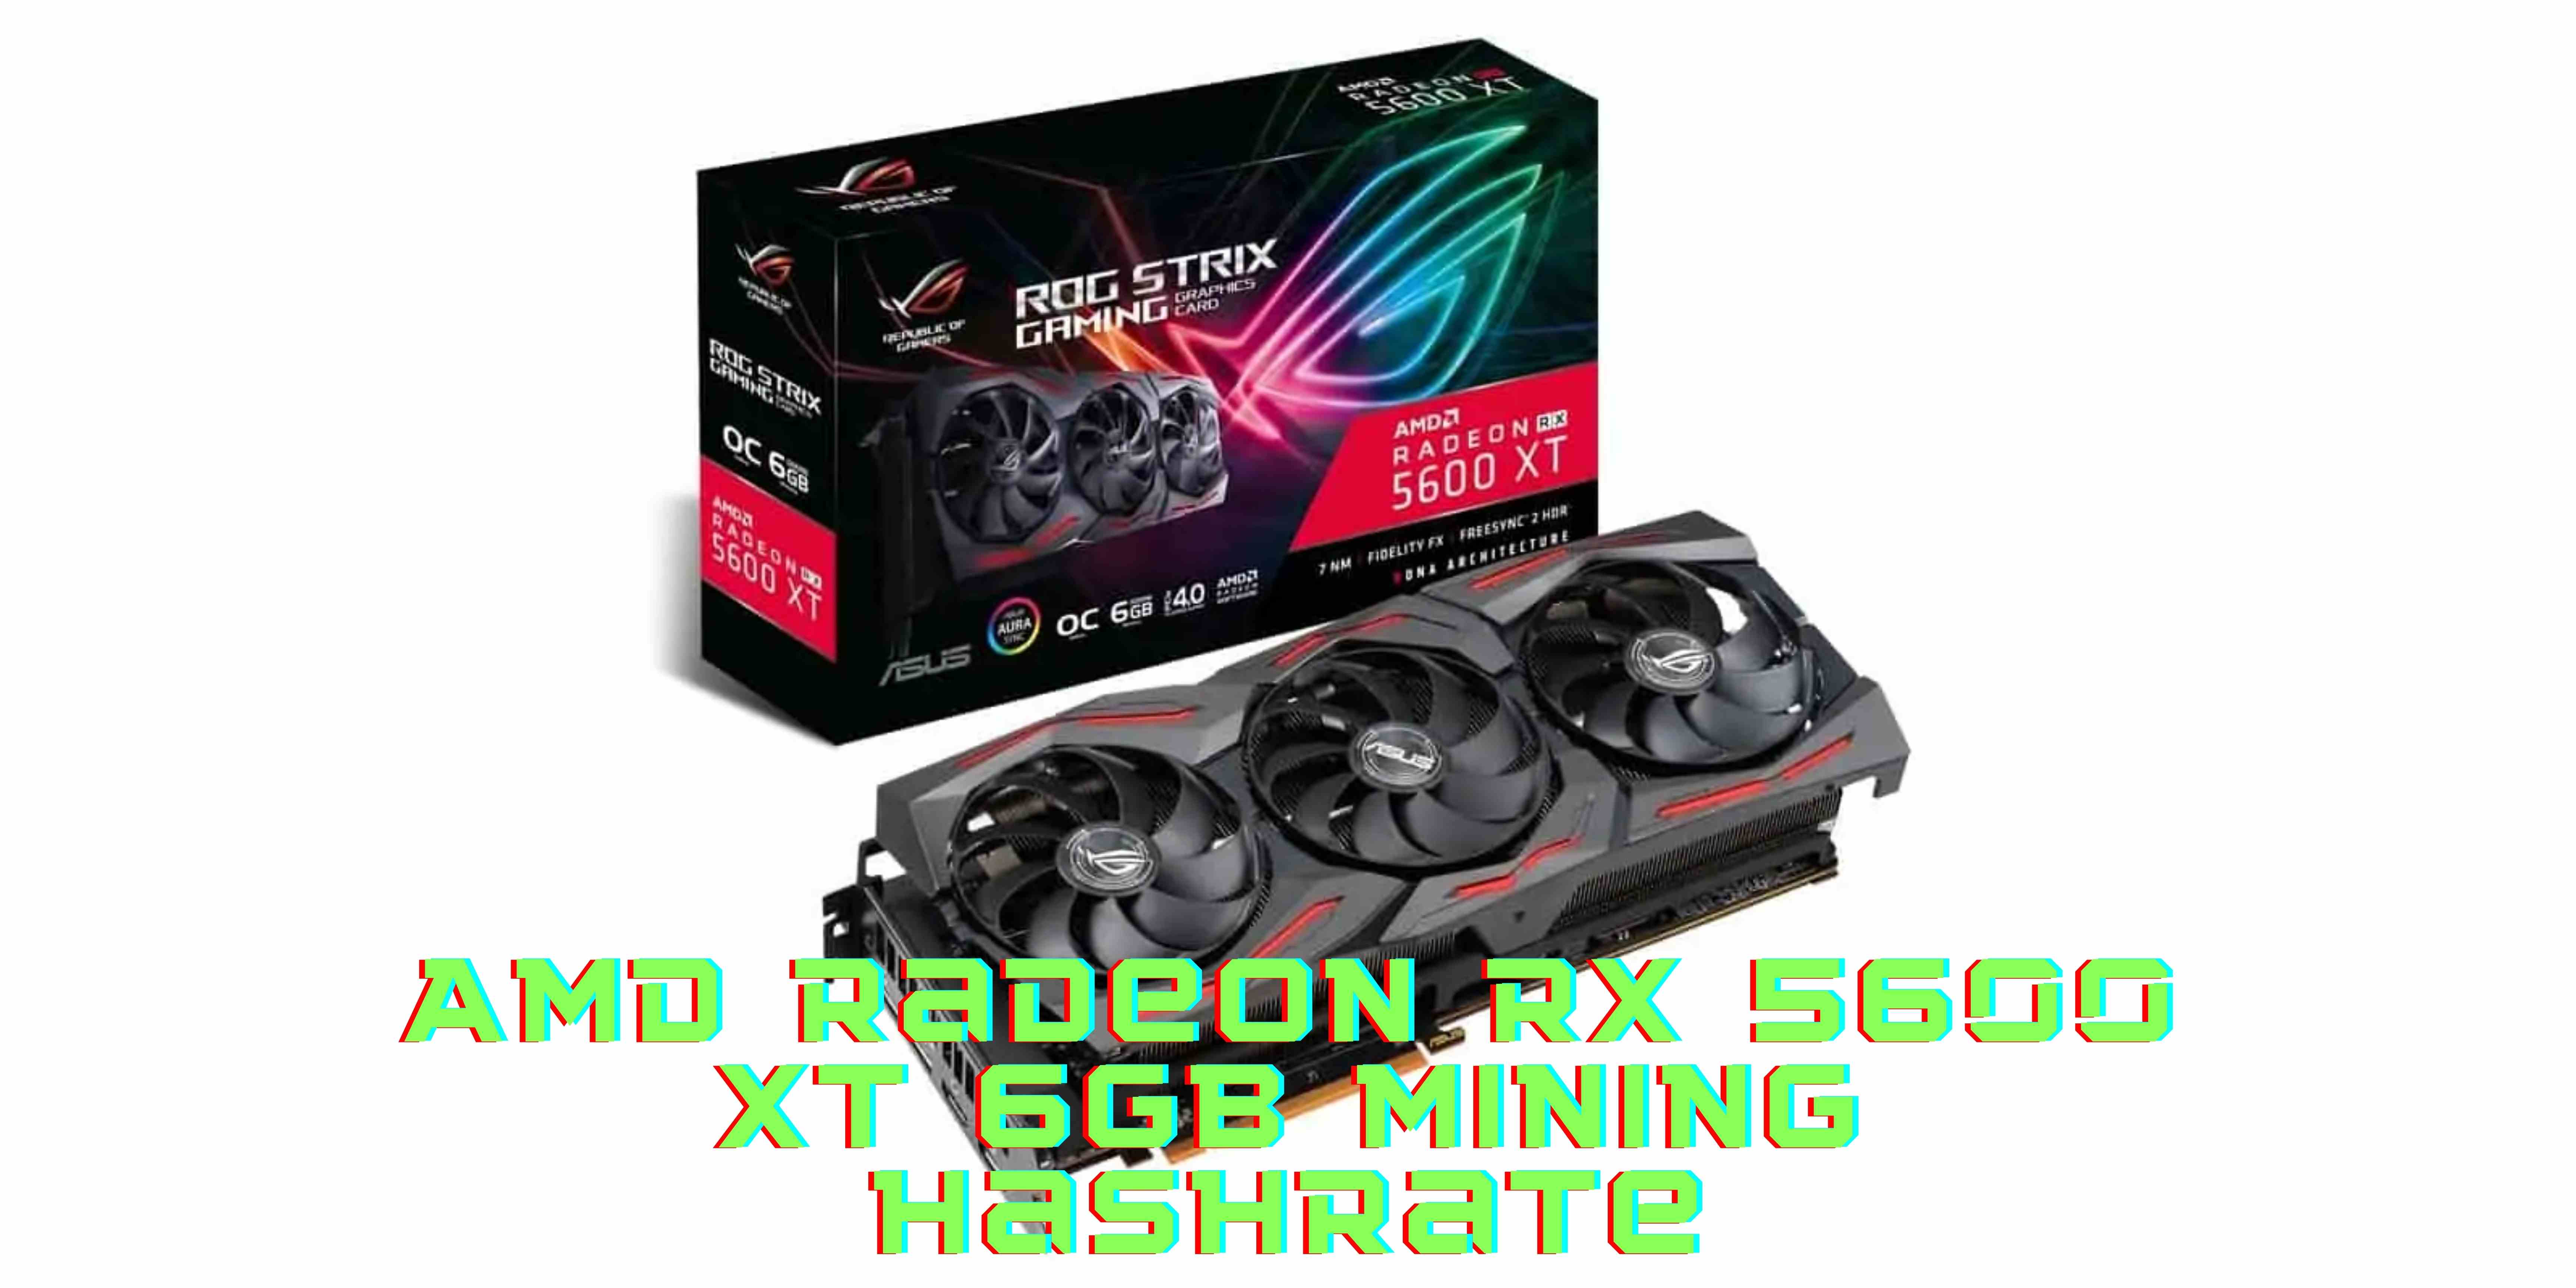 Most Energy-efficient Video Card For Mining Ethereum- AMD Radeon RX 5600 XT 6GB Mining Hashrate